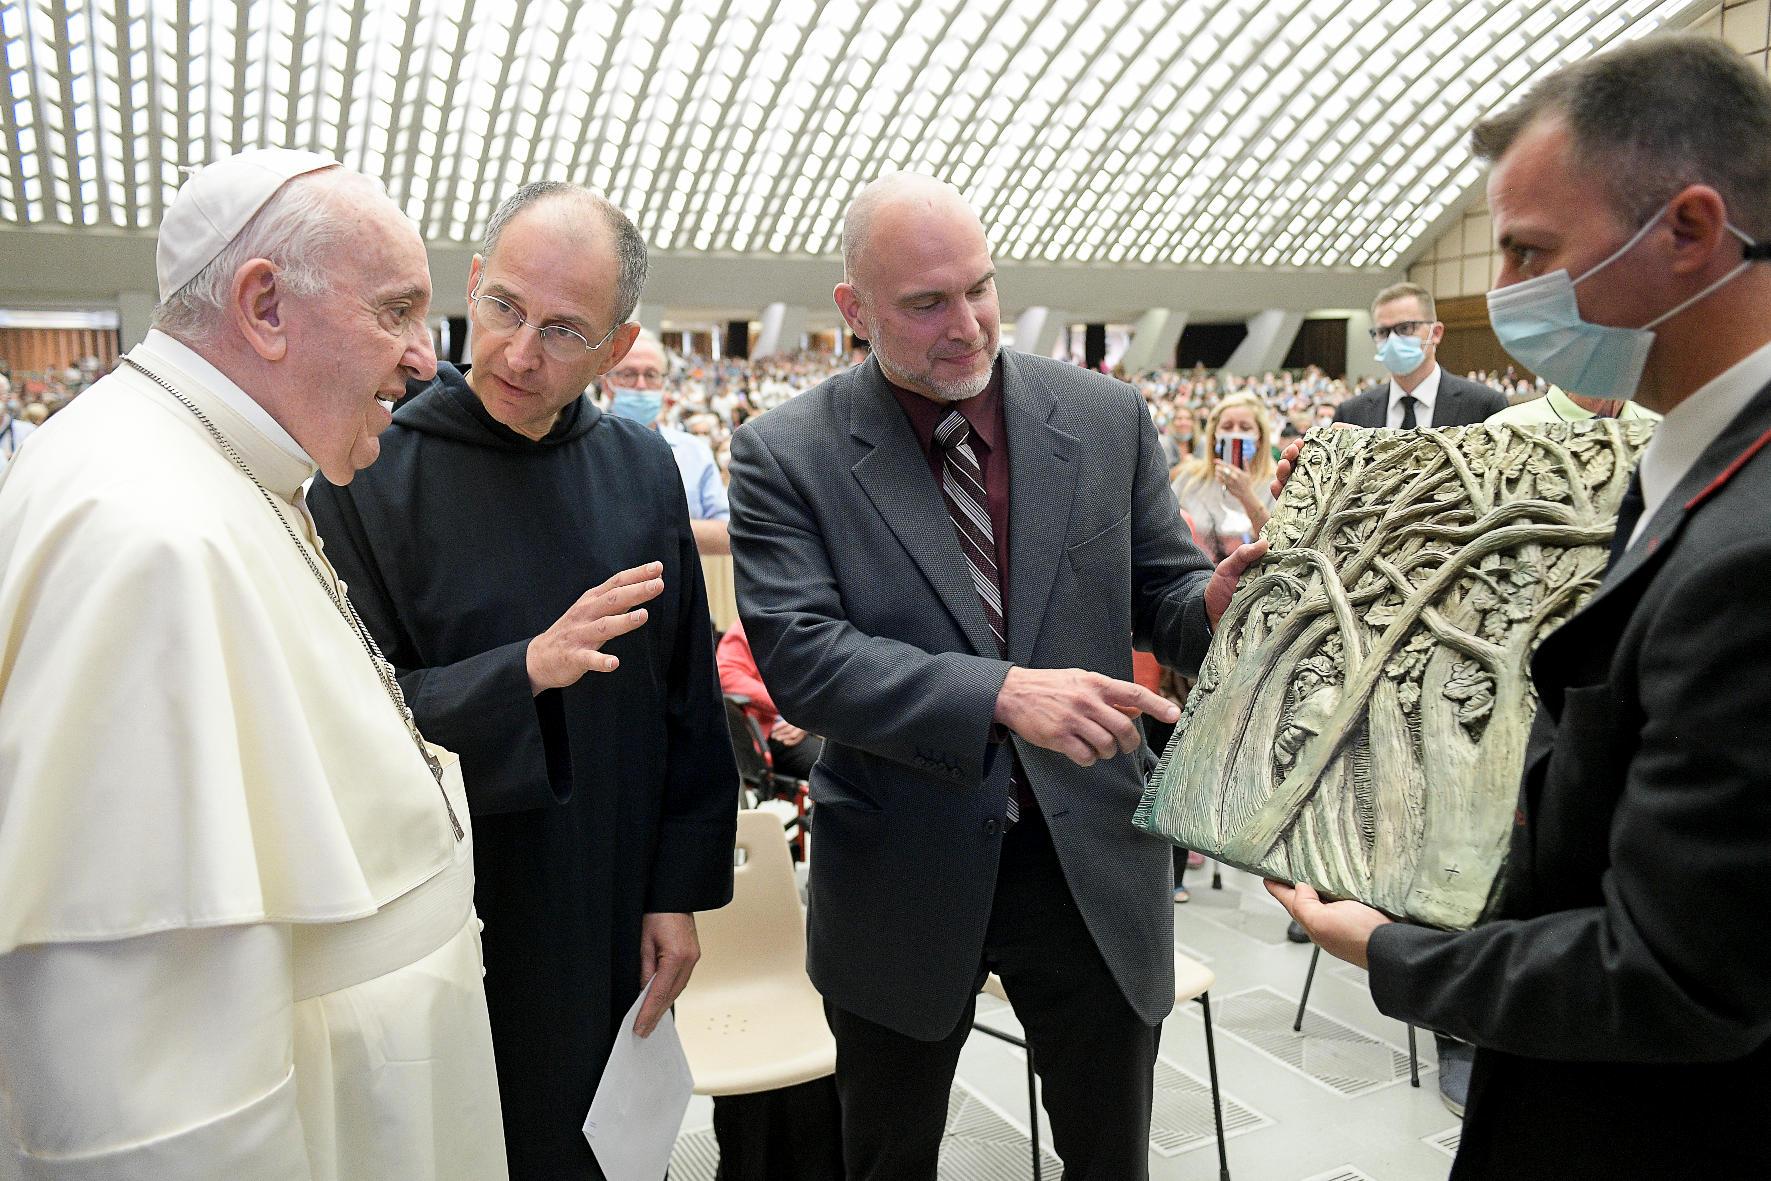 Men in suits hold a sculpted panel depicting intertwining trees up as another man appears to explain the panel to Pope Francis, indoors 